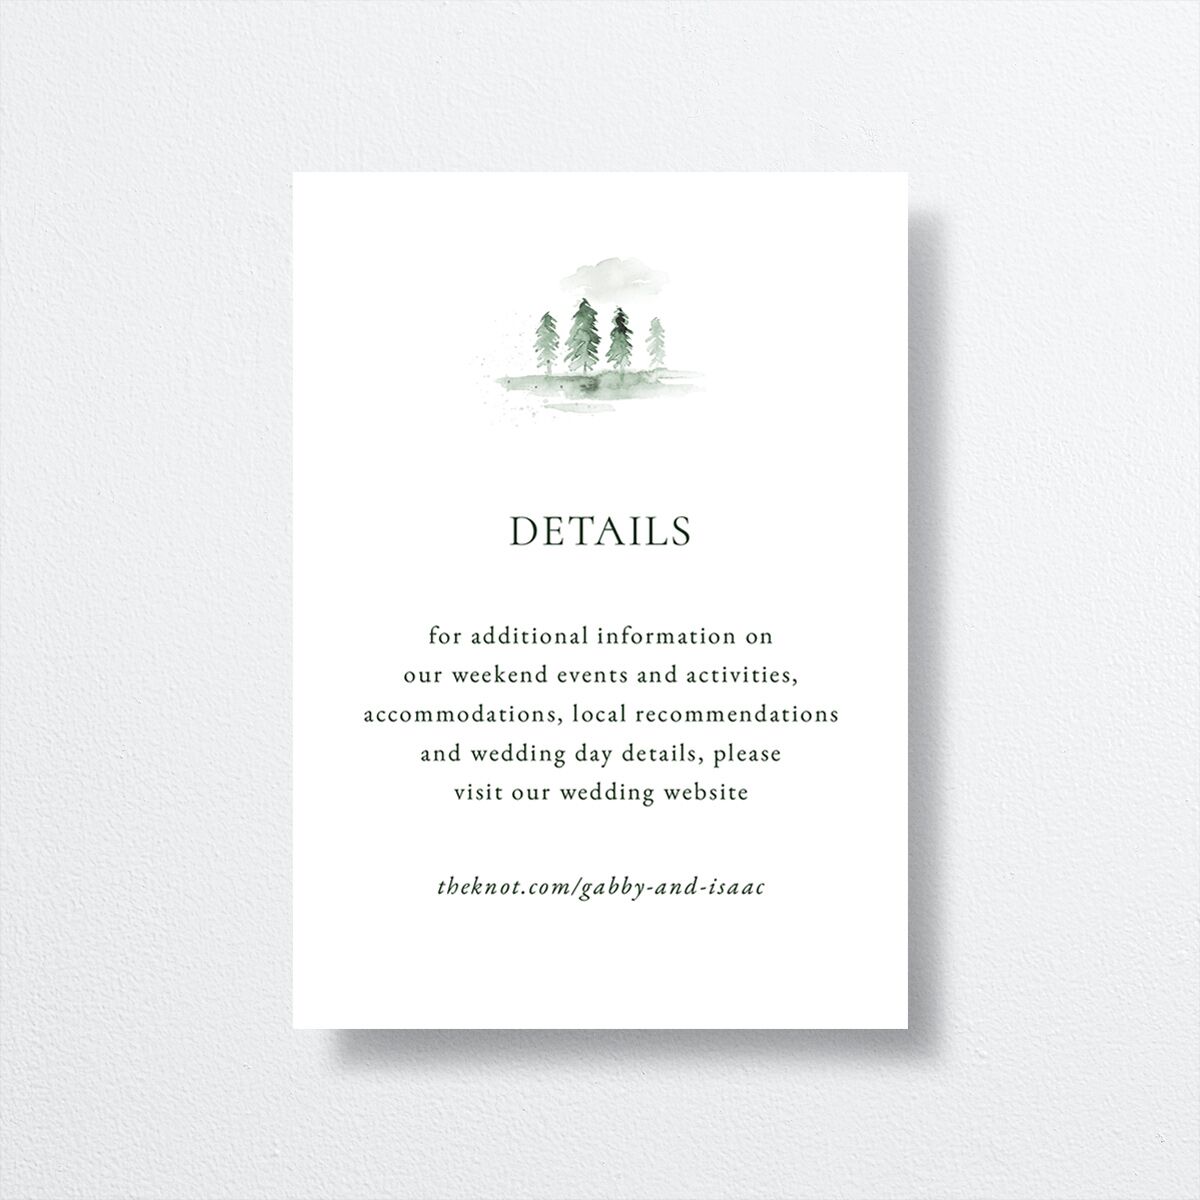 Watercolor Mountains Wedding Enclosure Cards front in green